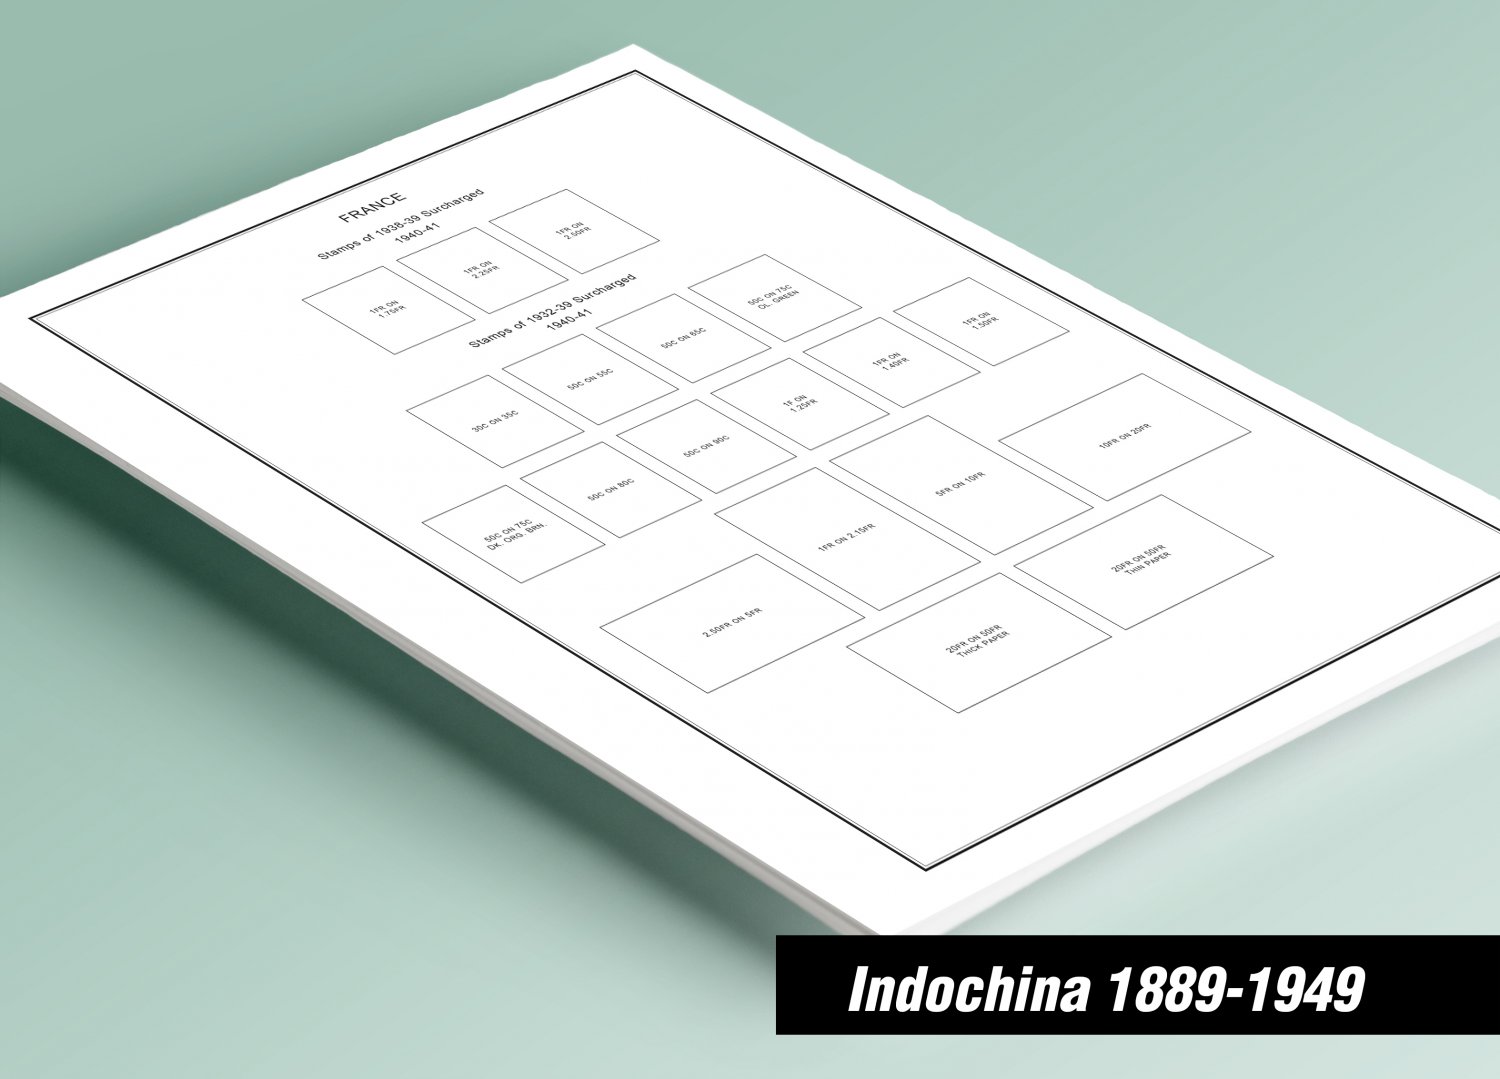 PRINTED INDOCHINA 1889-1949 STAMP ALBUM PAGES (35 non-illustrated pages)